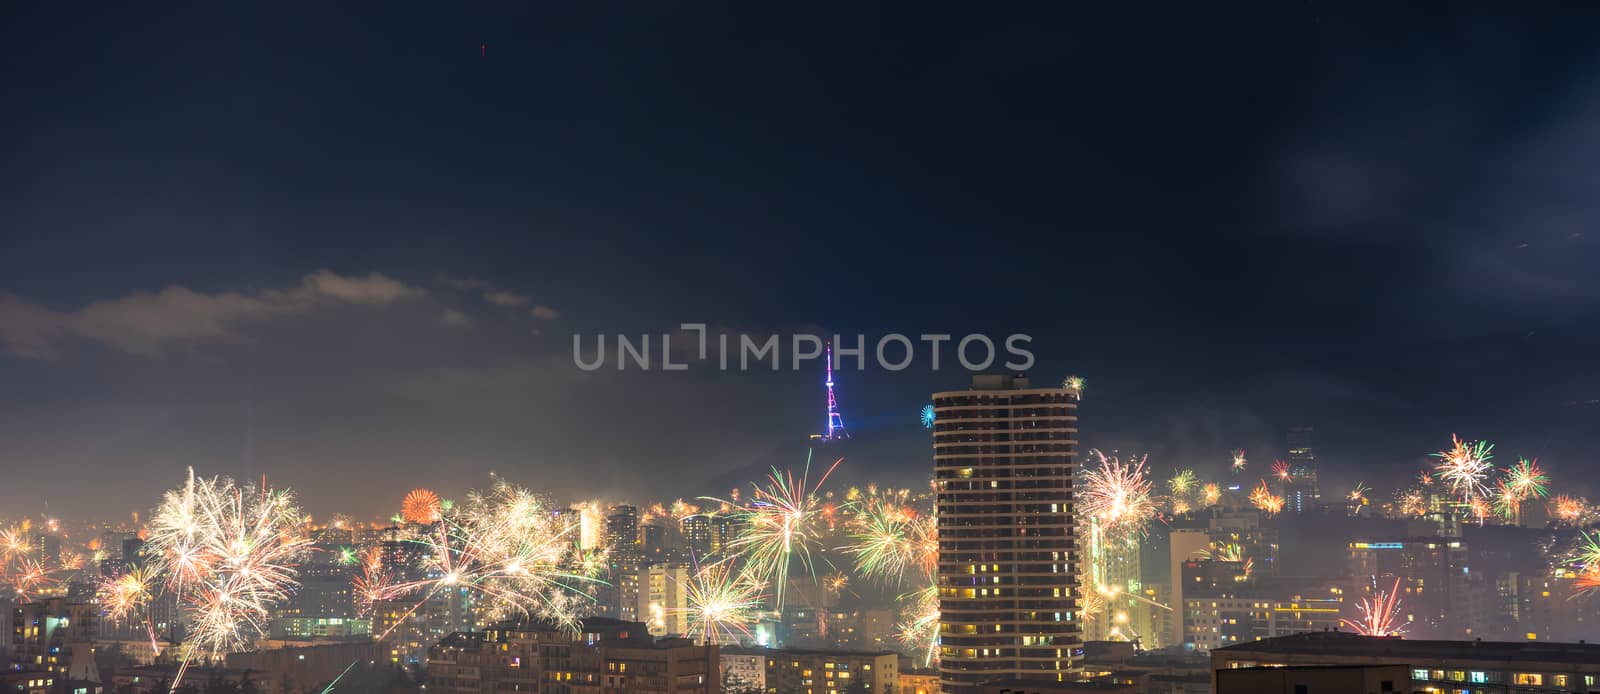 Georgia - Tbilisi. Meeting New 2020 year with fireworks over the central part of Tbilisi, capita city of Republic of Georgia in Caucasus region. 31.12.1019-01.01.2020